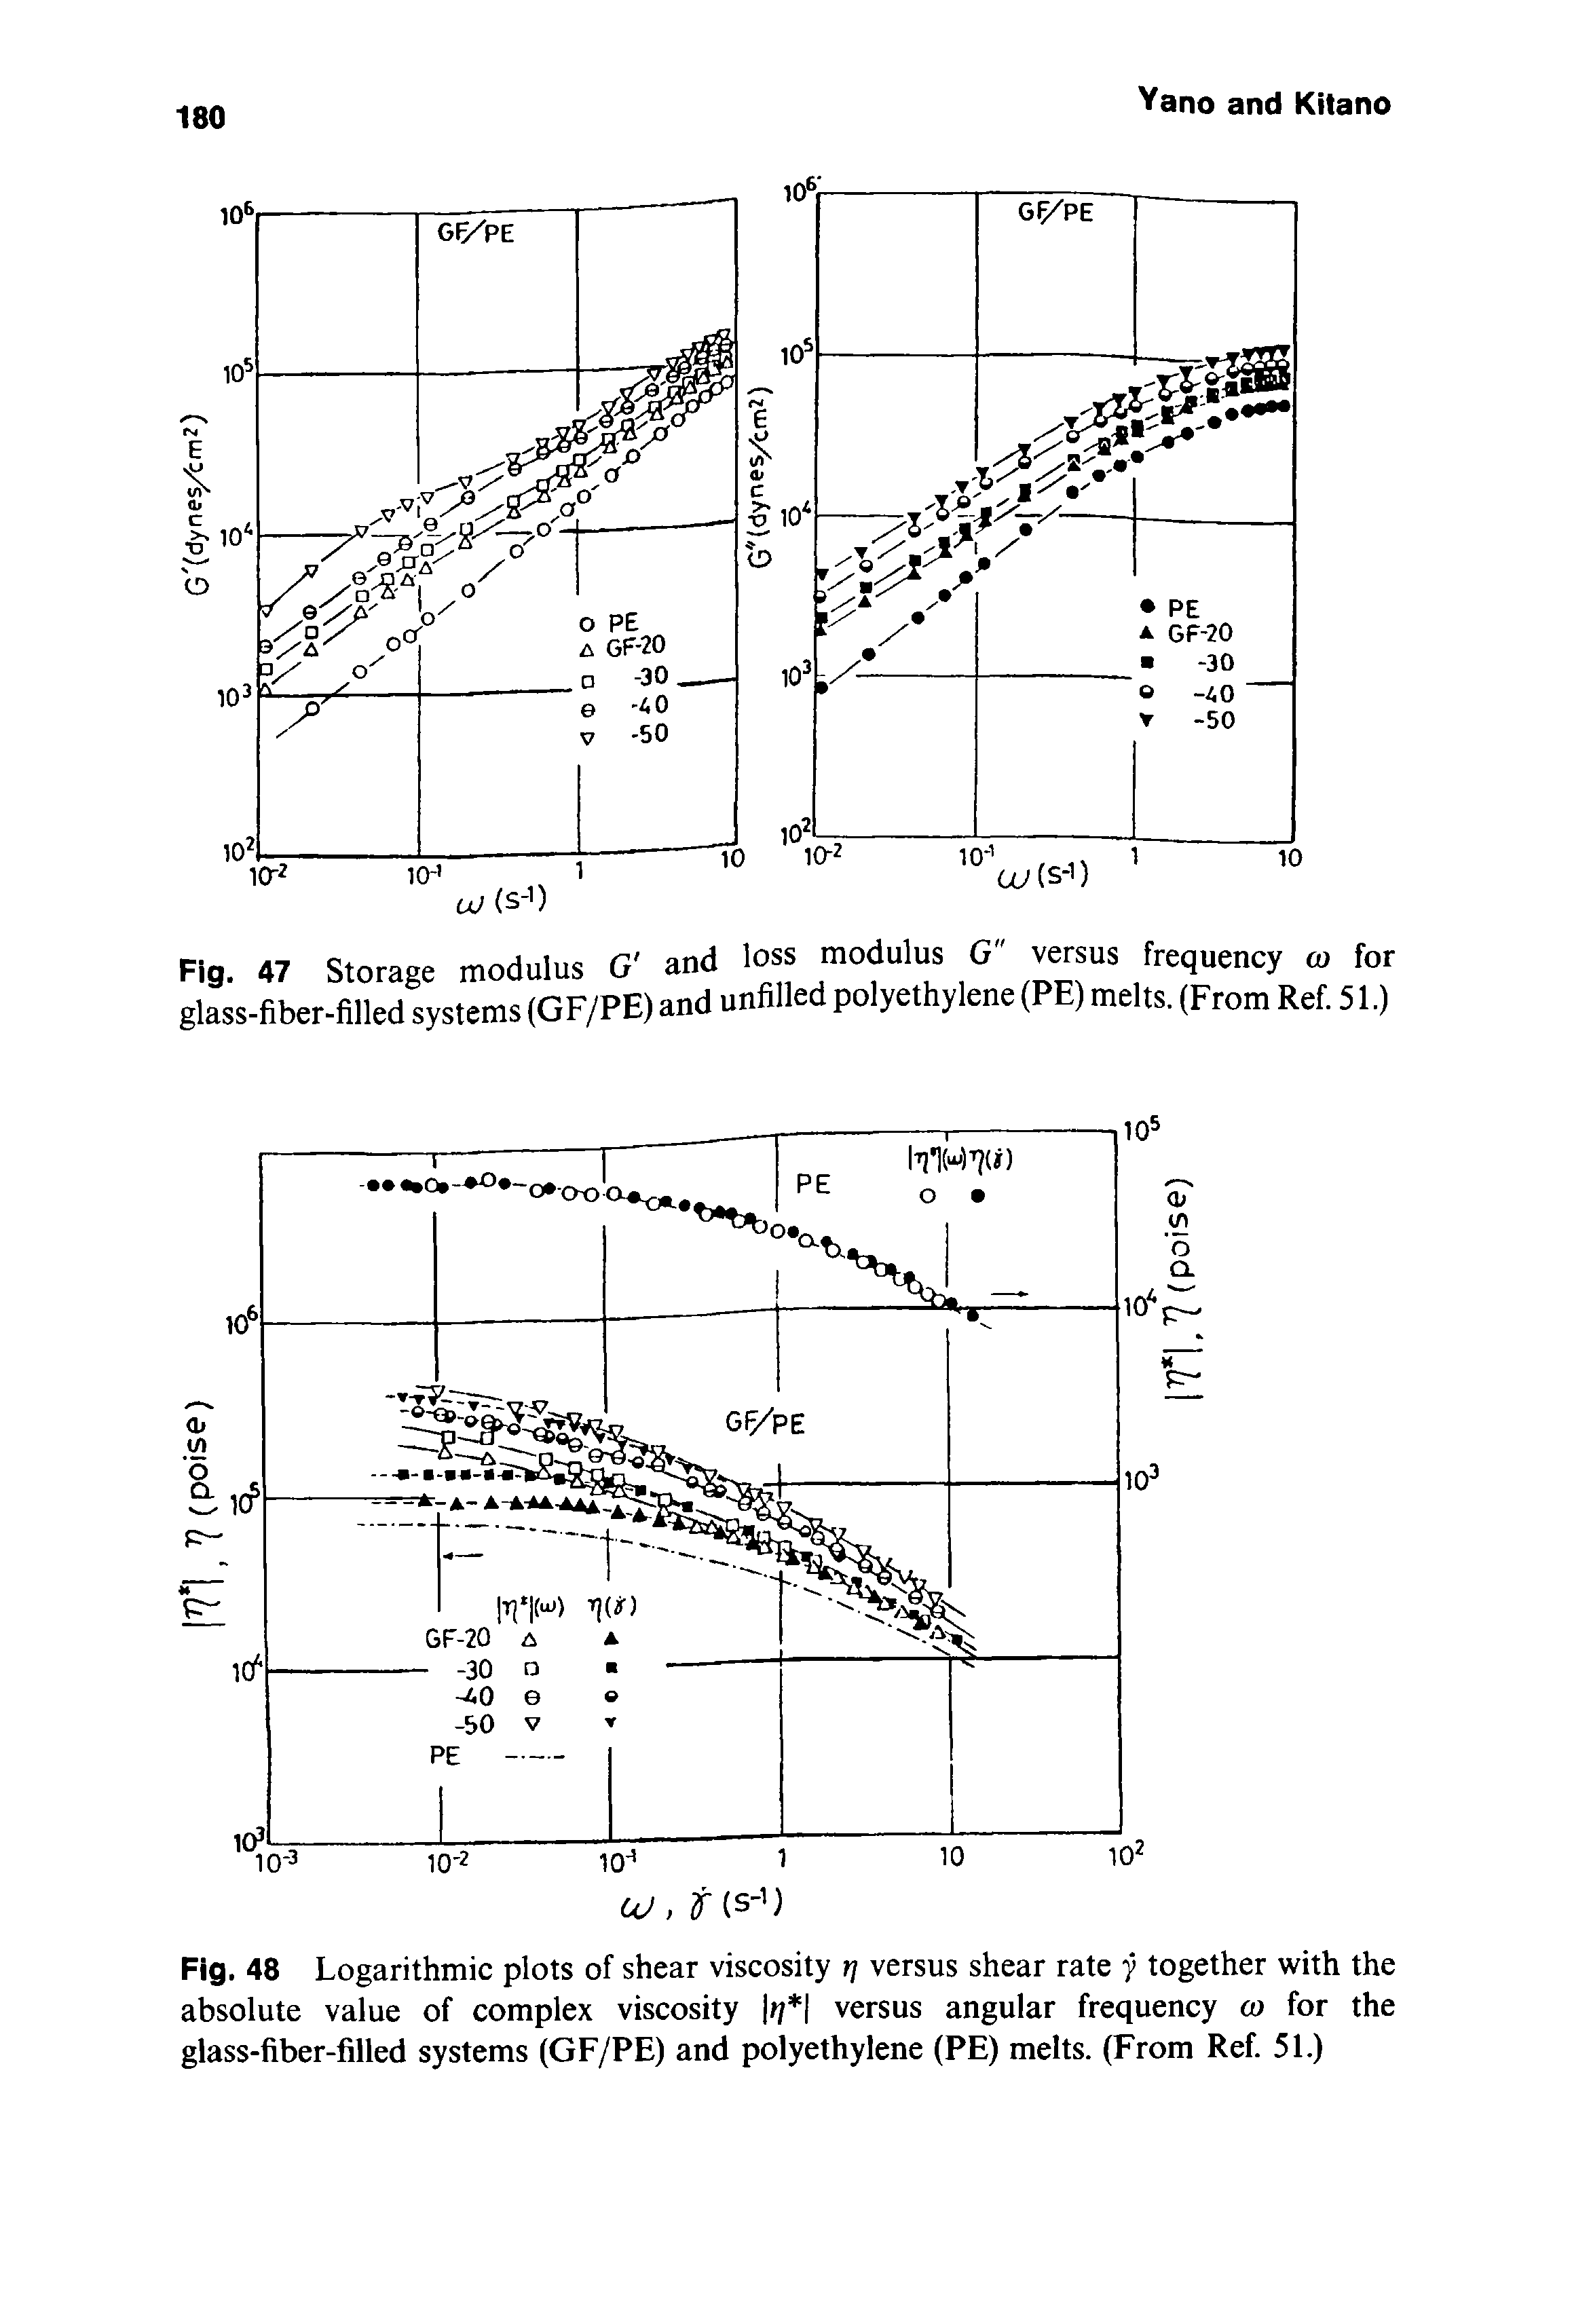 Fig. 48 Logarithmic plots of shear viscosity rj versus shear rate y together with the absolute value of complex viscosity // versus angular frequency co for the glass-fiber-filled systems (GF/PE) and polyethylene (PE) melts. (From Ref. 51.)...